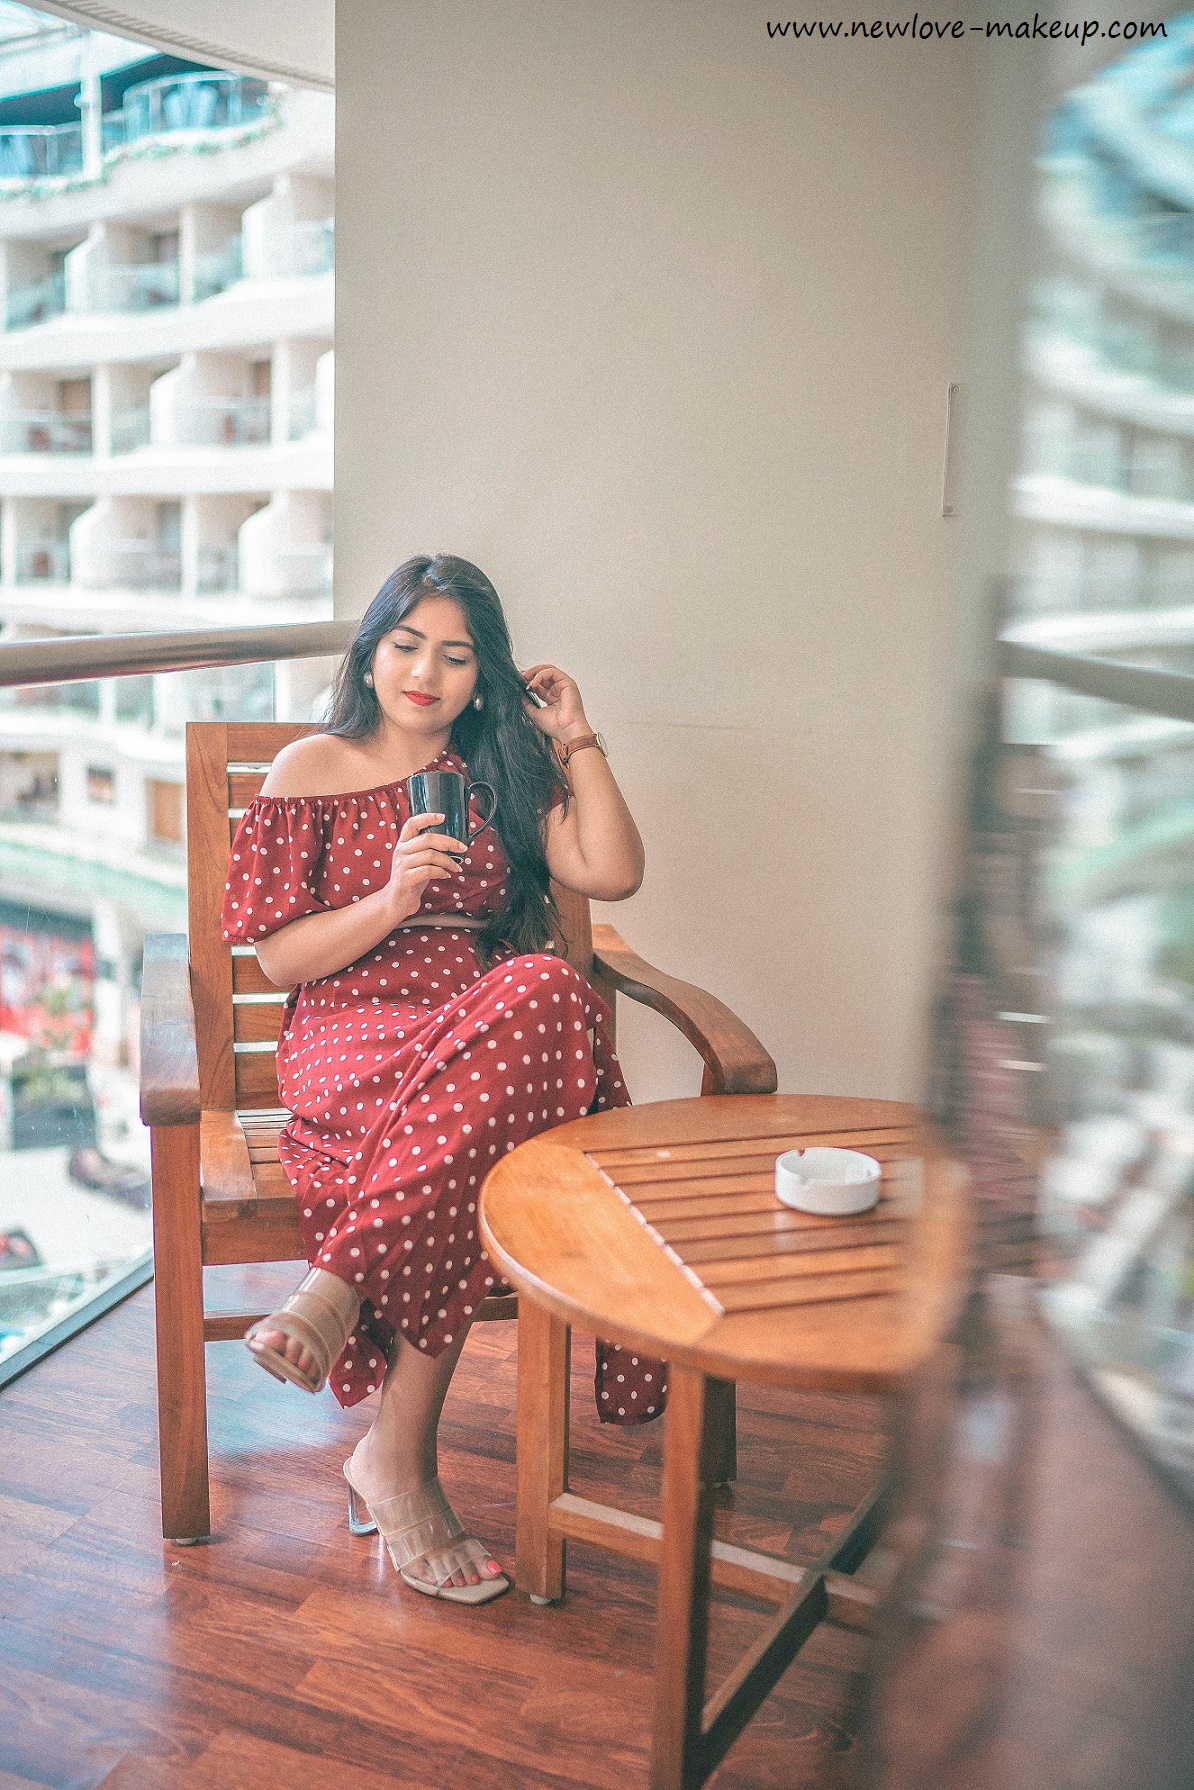 OOTD: Vintage Polka Dots Retro Style Co-ords, Indian Fashion Blog